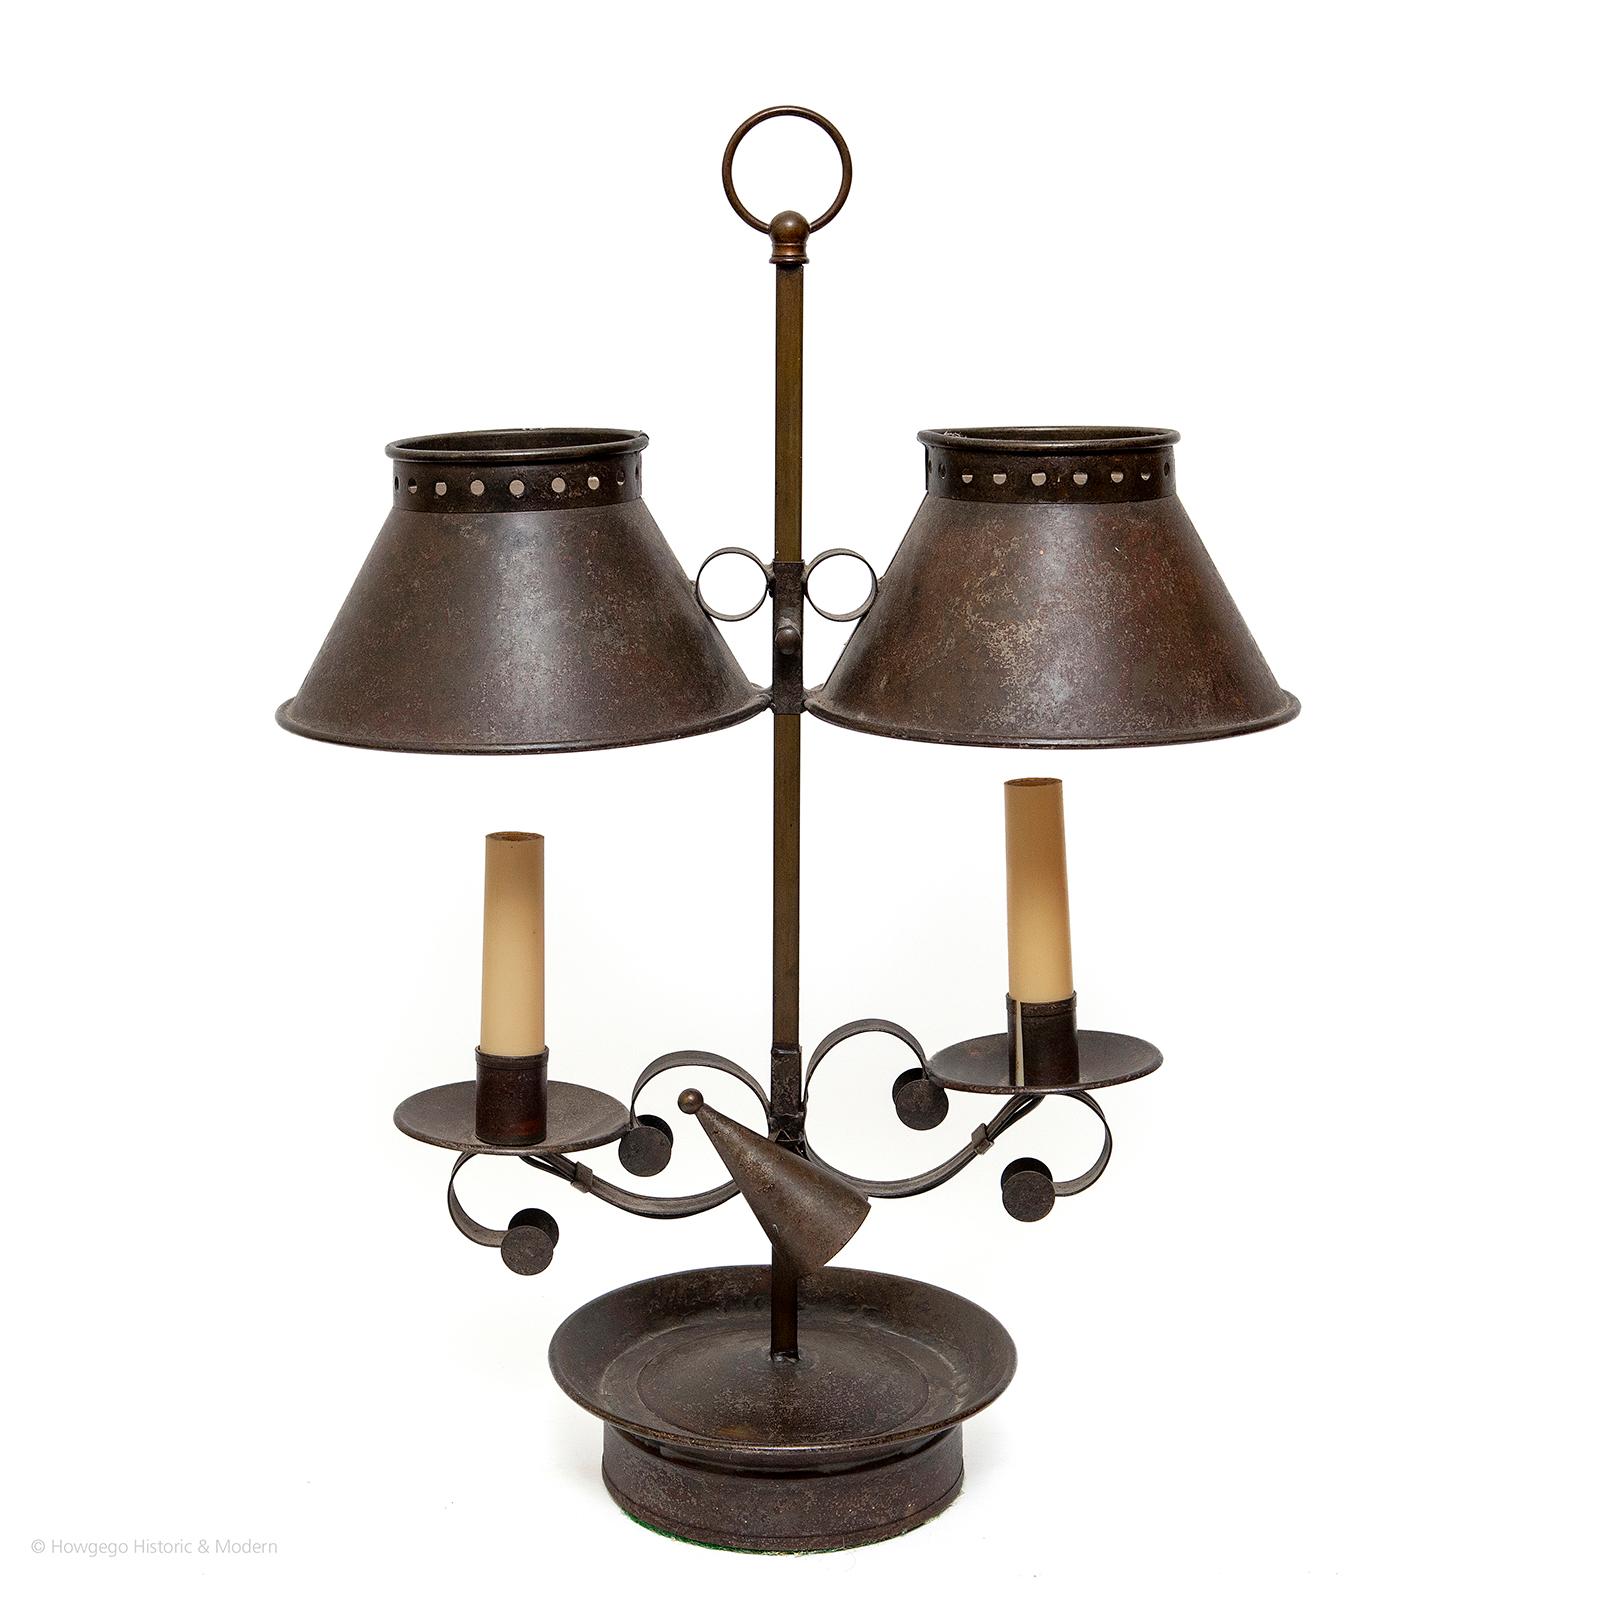 Surviving pieces of vernacular lighting are extremely rare and it is hard to source convincing re-creations. These are copies of a period fitting from xx and have a plausible antiqued patina.

Double candle tin table lamp with adjustable shades